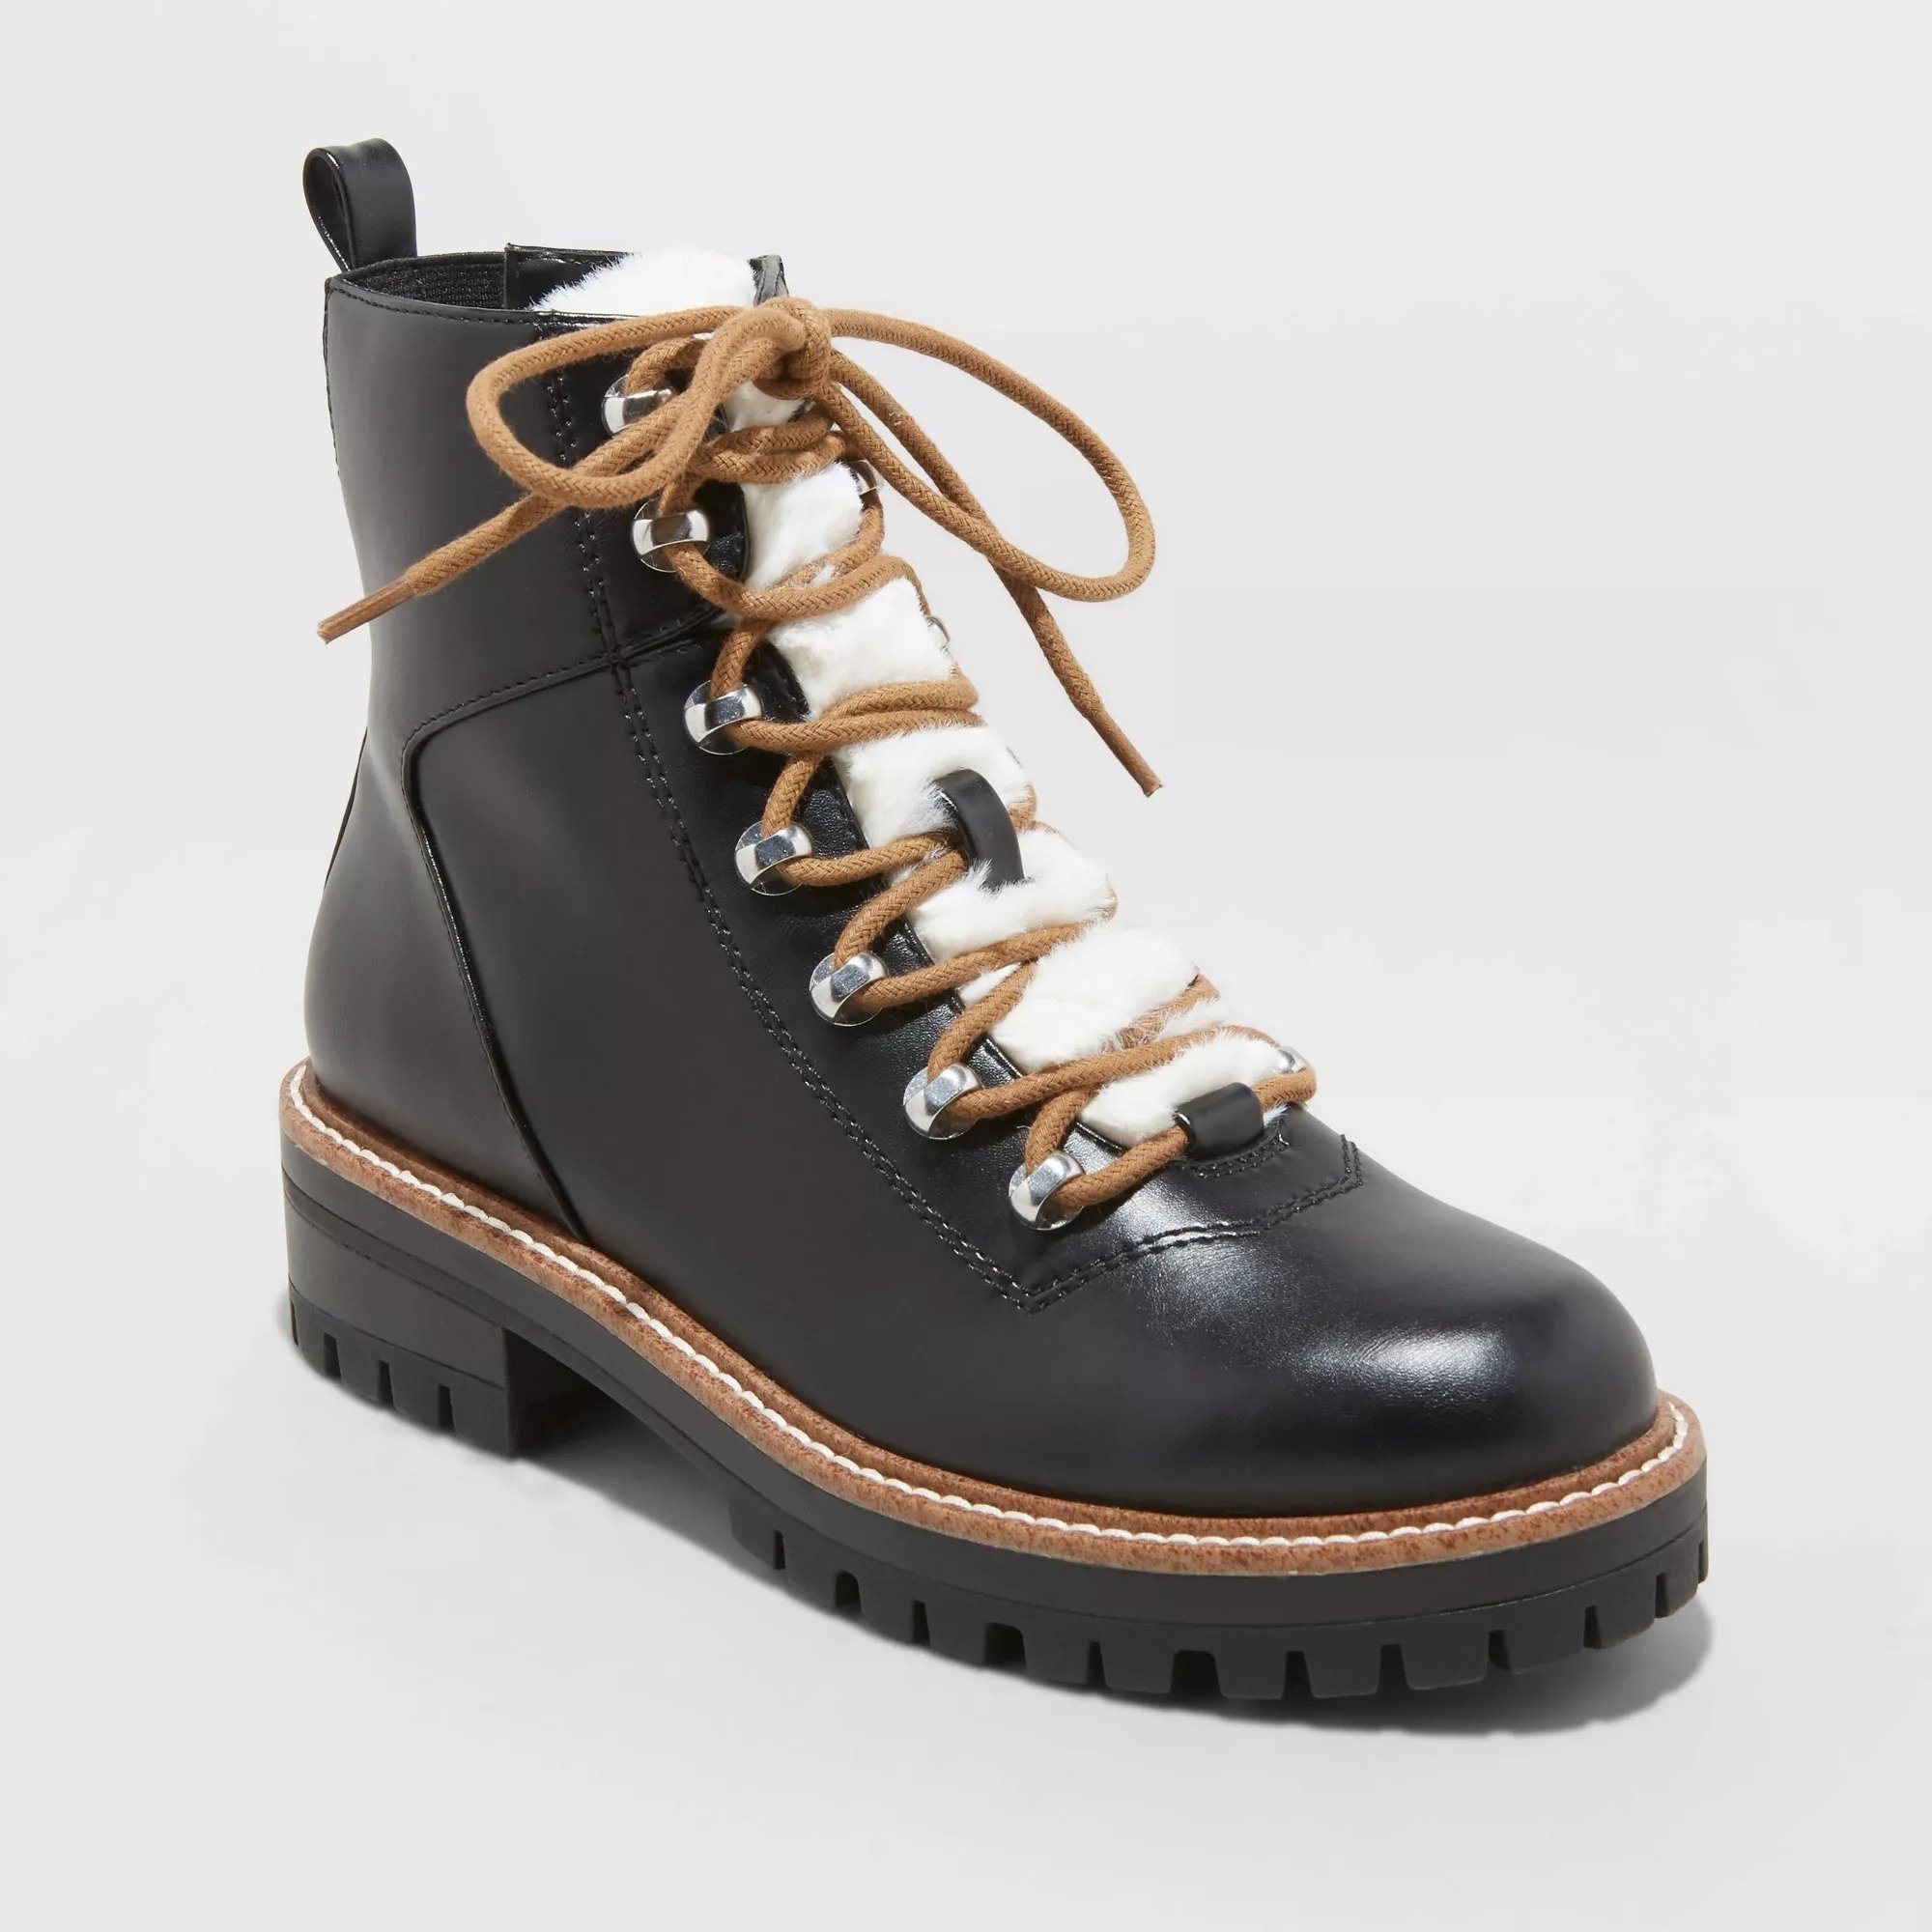 The lug sole boots in black faux leather, featuring faux-fur lining, lace-up, and side zipper closure